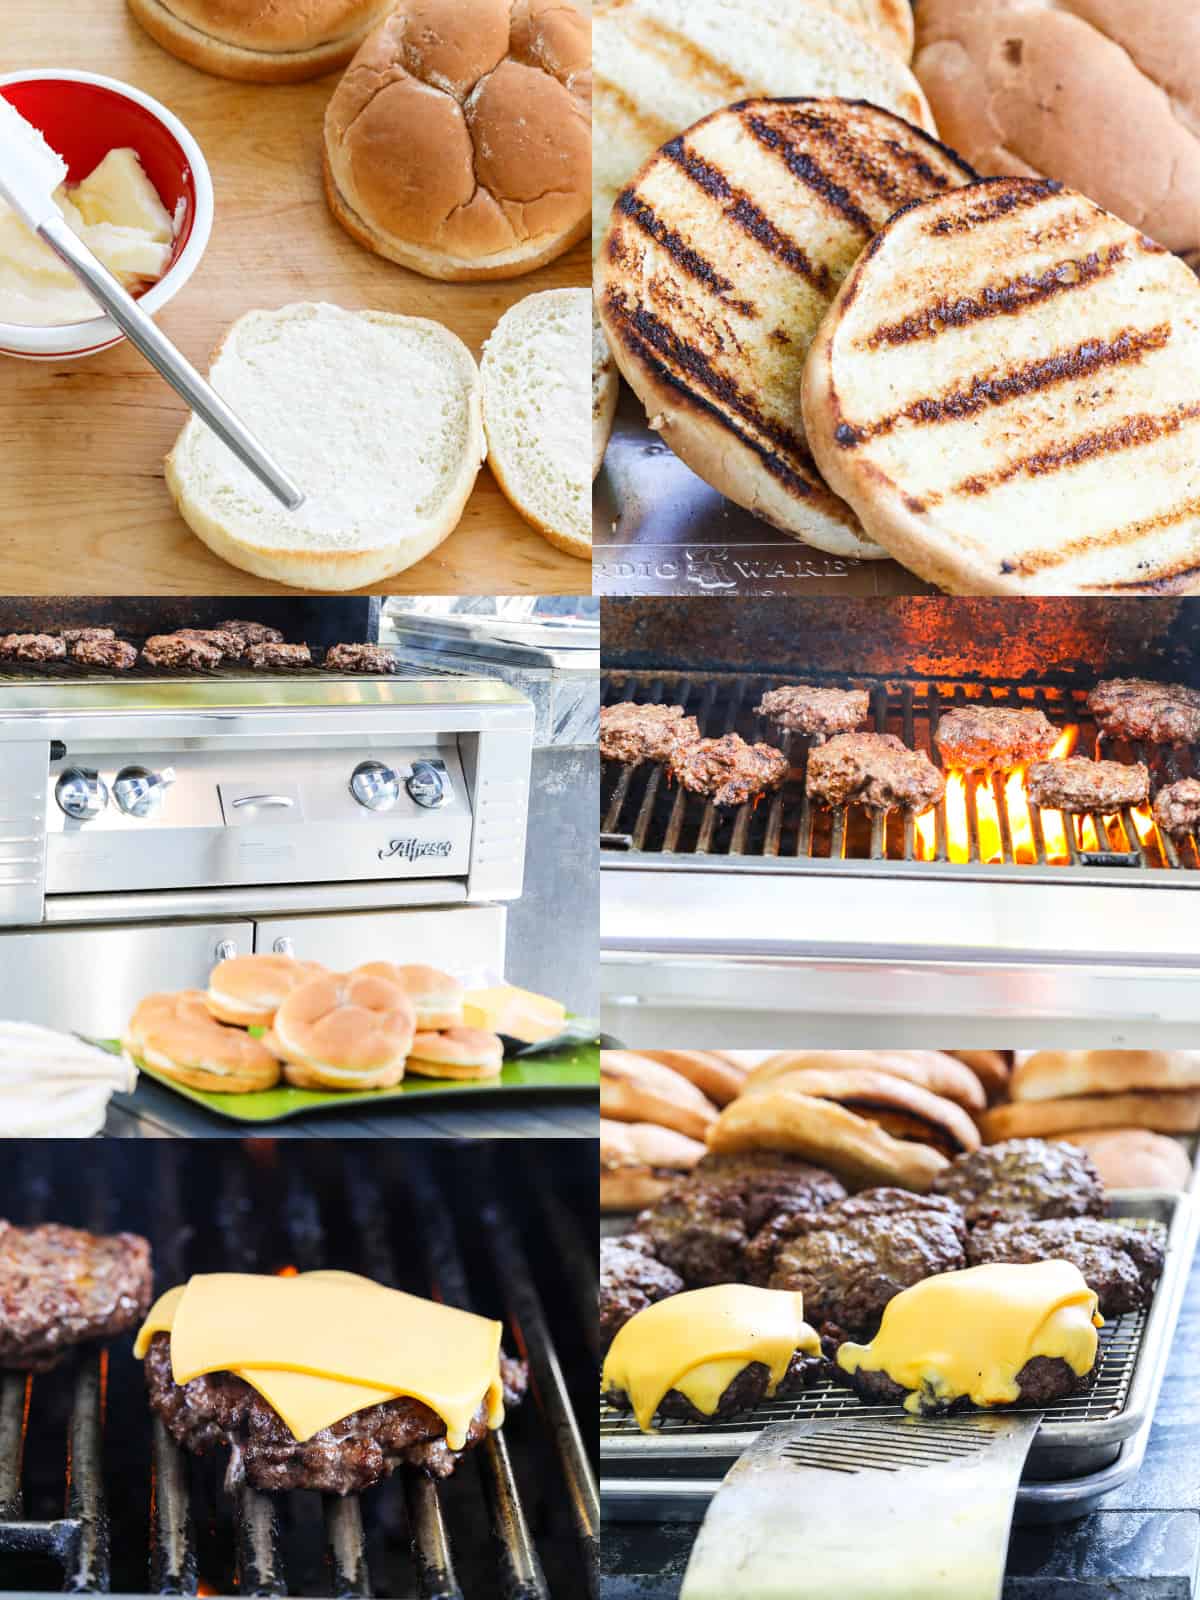 A graphic showing how to butter and toast hamburger buns and grill the patties on a grill with American cheese.